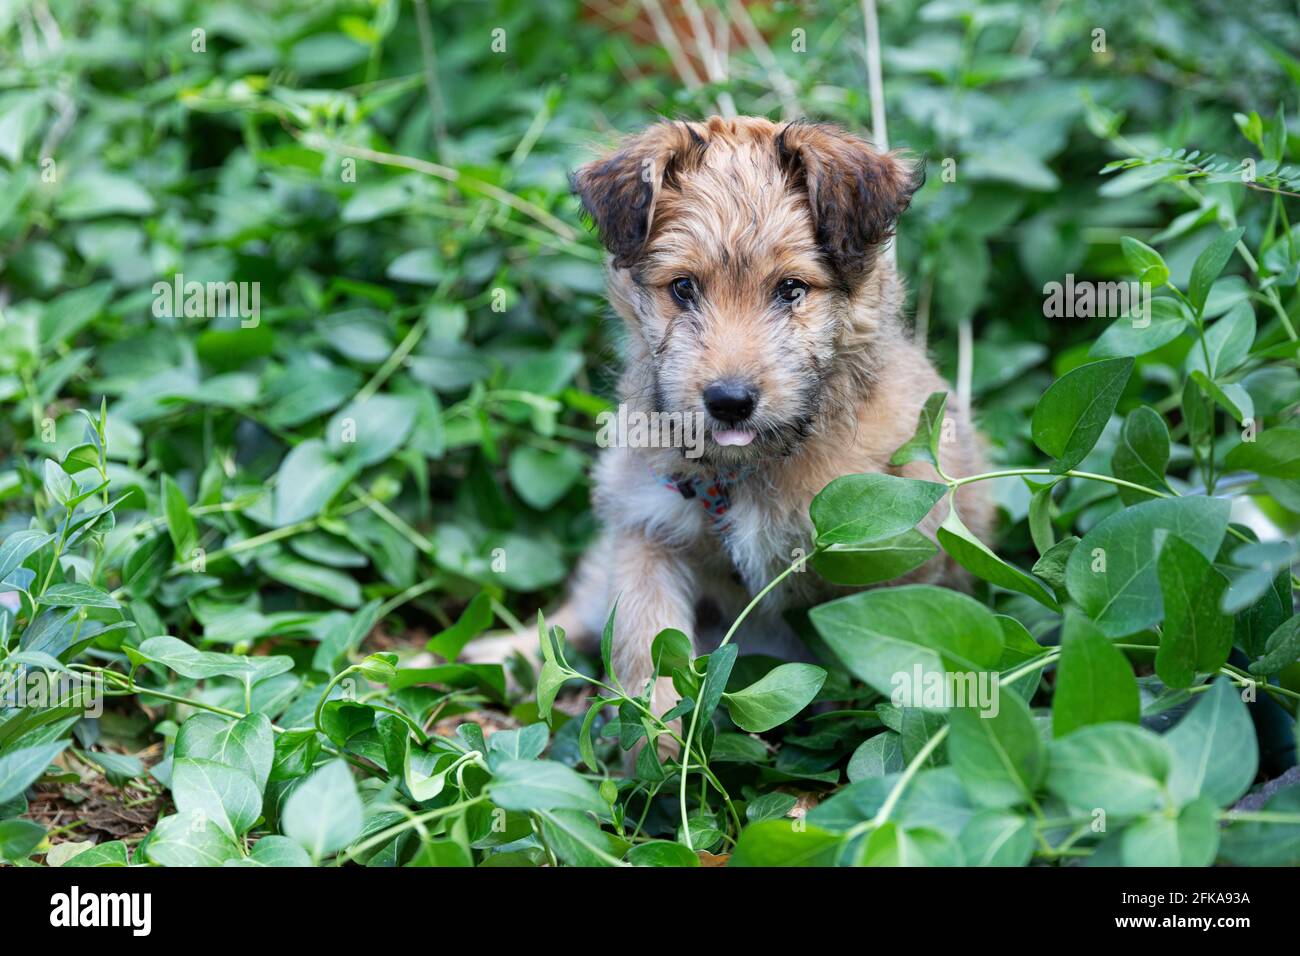 8 week old mixed poodle breed puppy sitting in the garden plants. Stock Photo